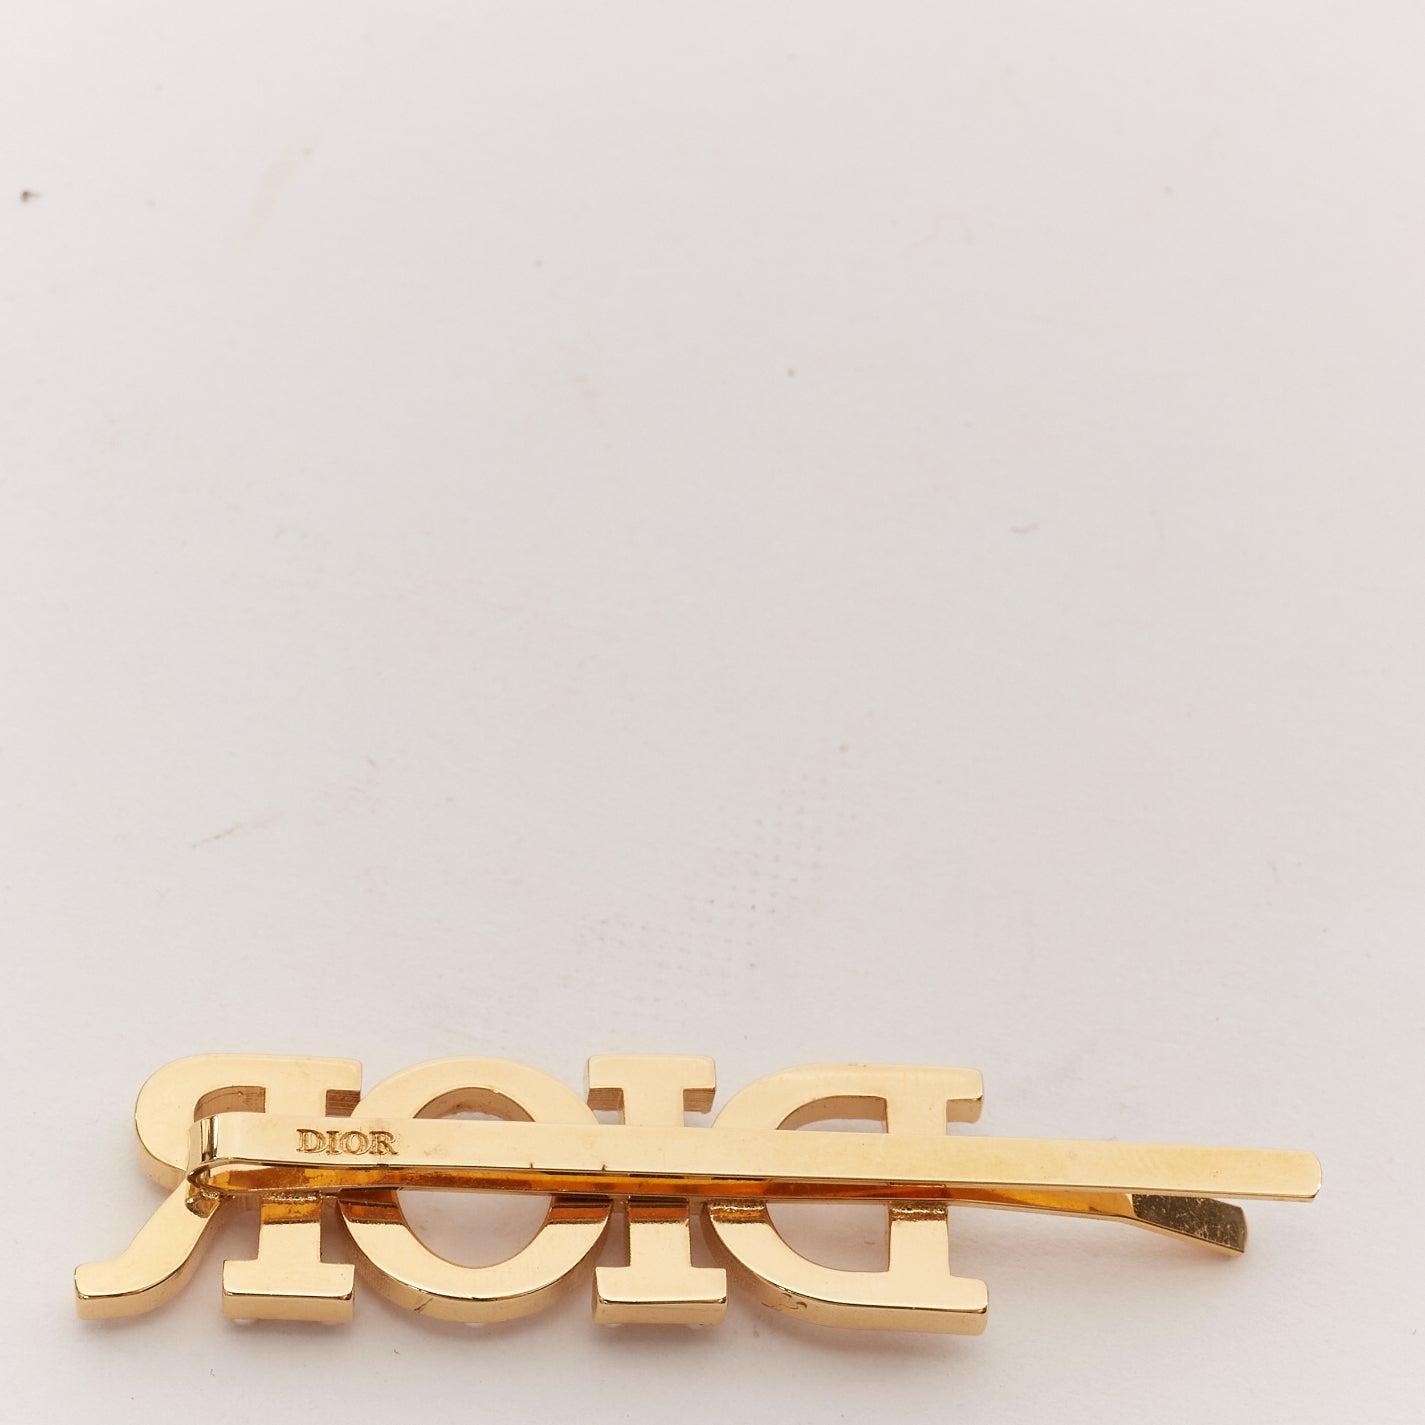 CHRISTIAN DIOR cream faux pearl logo gold metal barrette hair clip
Reference: AAWC/A00891
Brand: Dior
Material: Metal, Faux Pearl
Color: Pearl, Gold
Pattern: Solid
Closure: Clip On
Lining: Gold Metal

CONDITION:
Condition: Very good, this item was